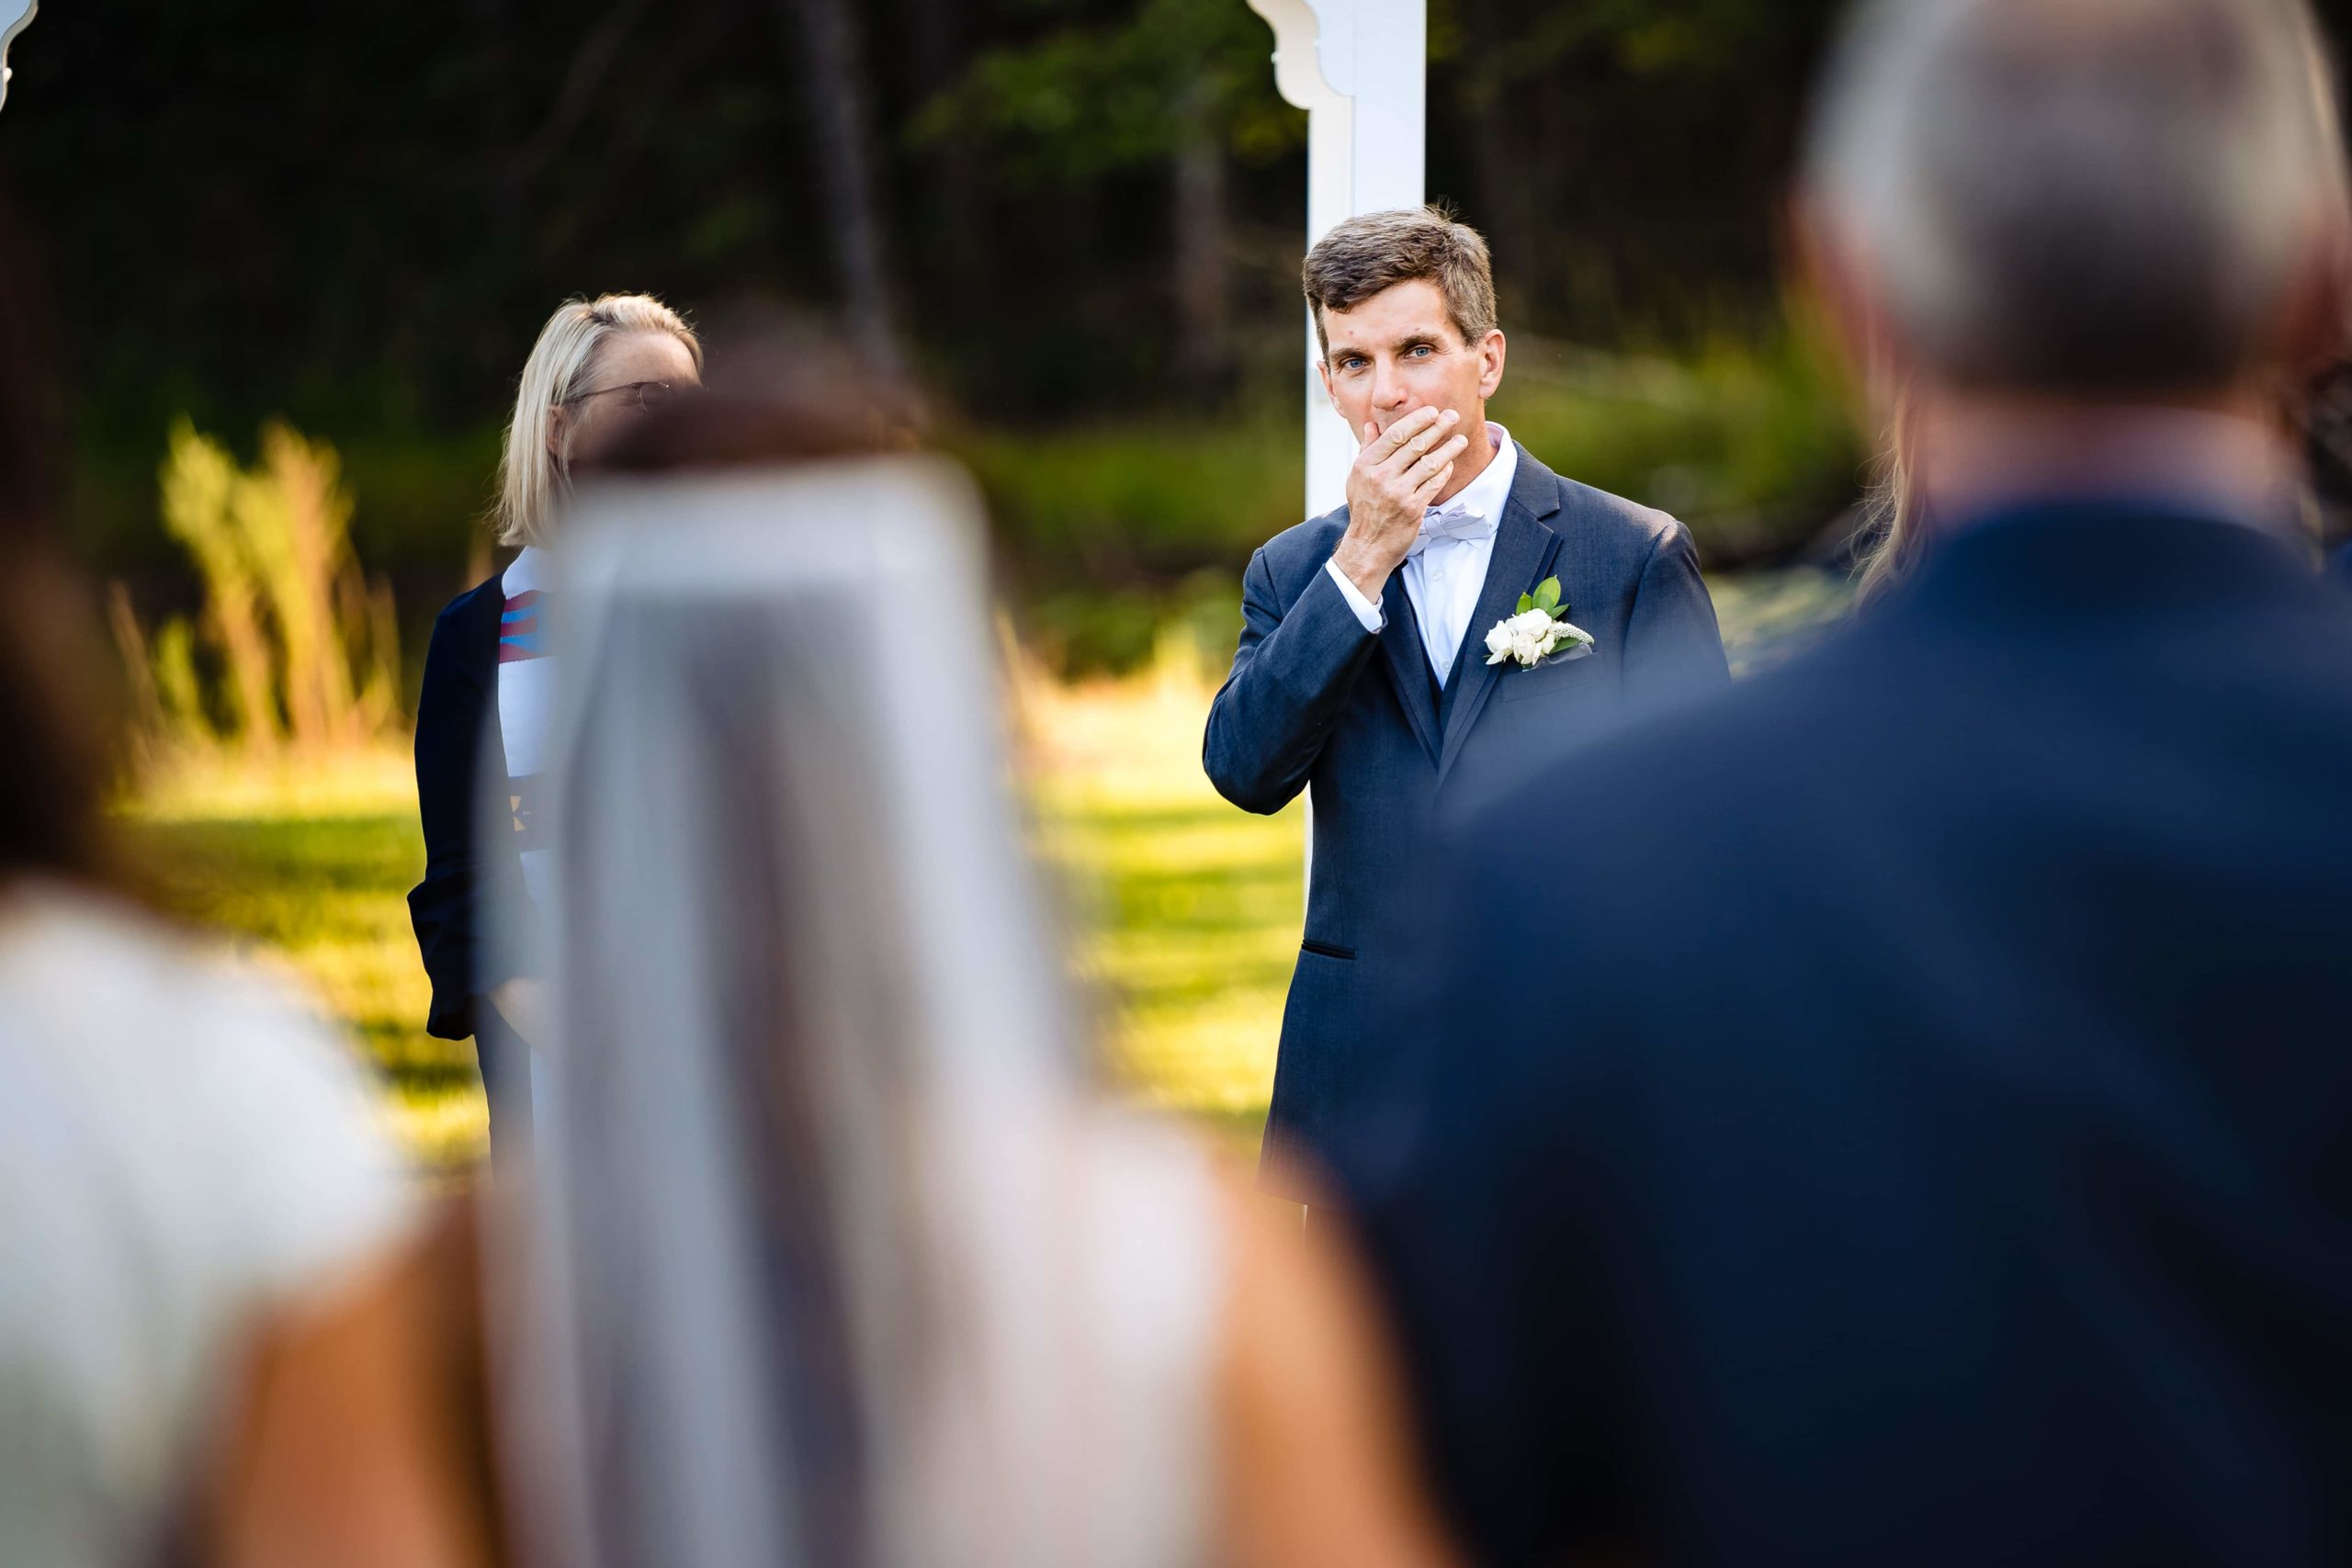 If you have 2 photographers at your wedding, you can get both angles of the first look and the walk down the aisle - here, one photographer has captured the groom's reaction as the bride walks down the aisle. The other photographer photographed the bride walking in